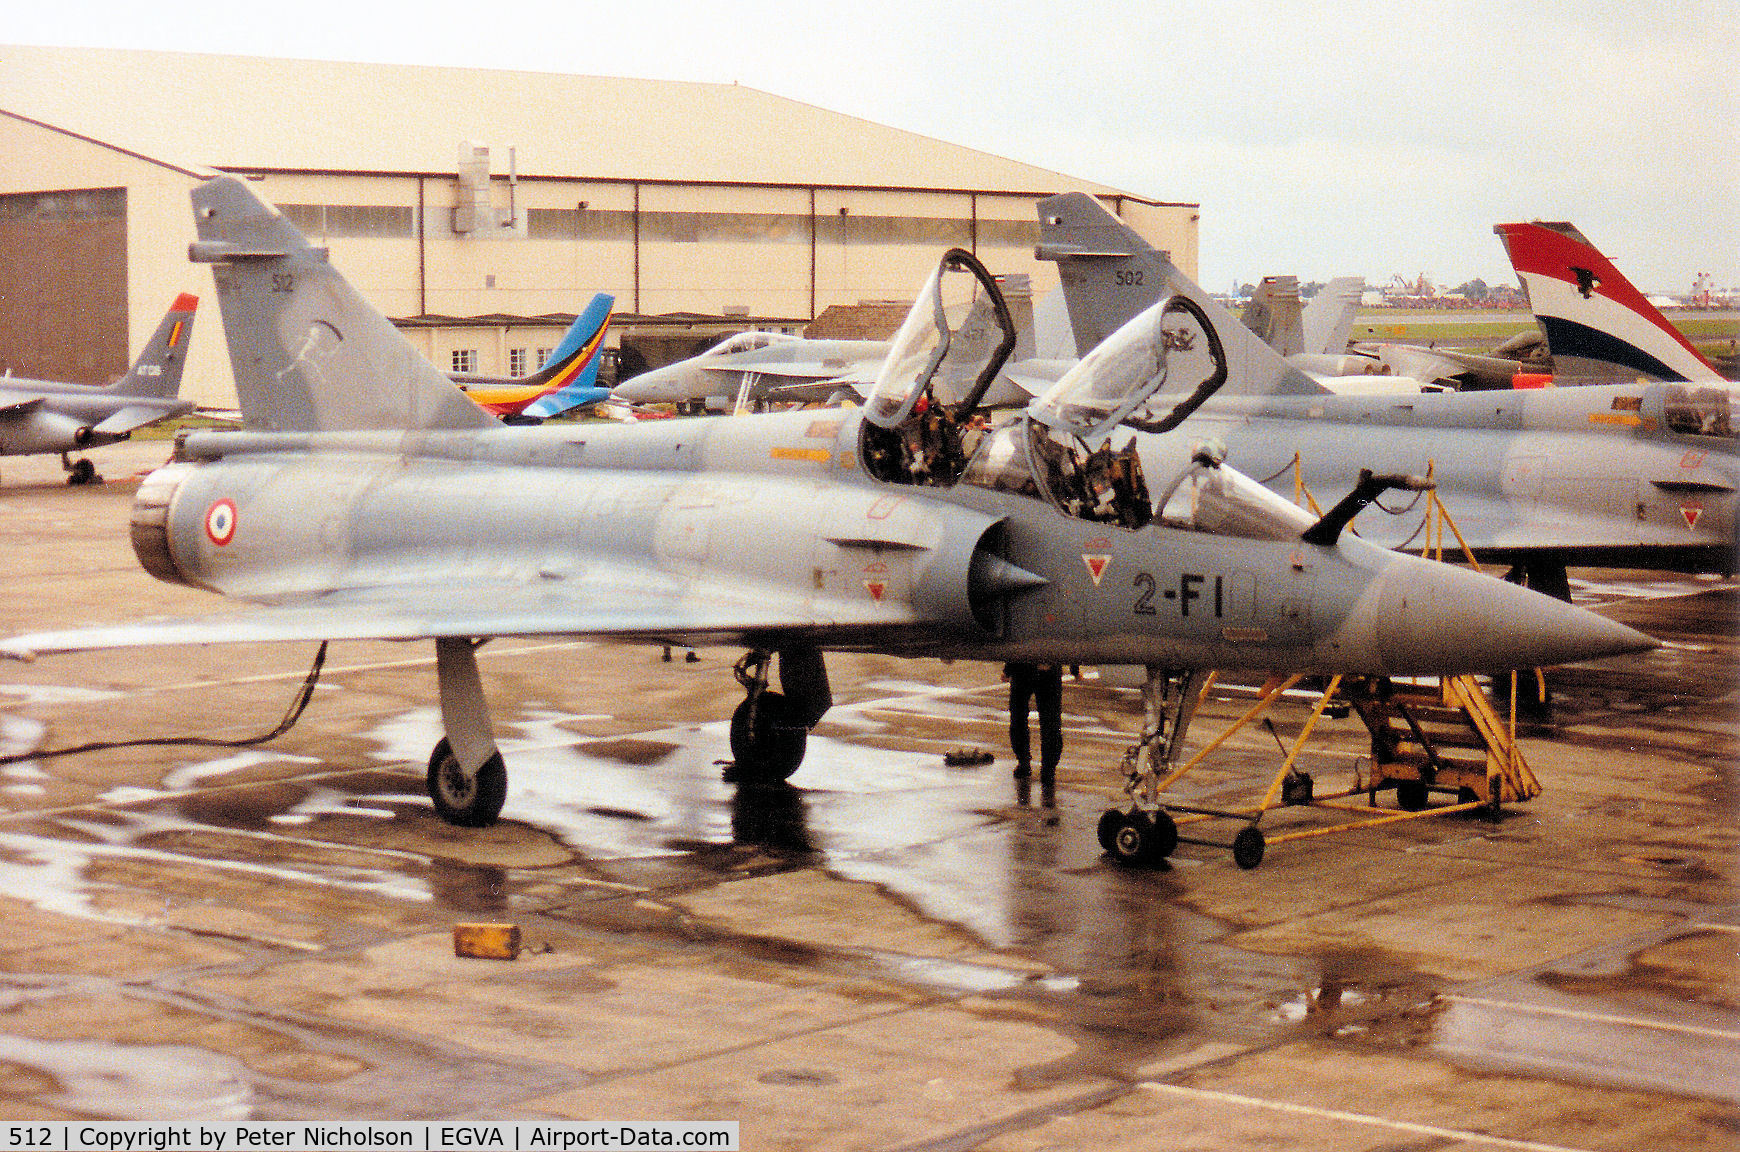 512, Dassault Mirage 2000B C/N 145, Mirage 2000B, callsign French Air Force 4200, of EC 2/2 on the flight-line at the 1993 Inntl Air Tattoo at RAF Fairford.